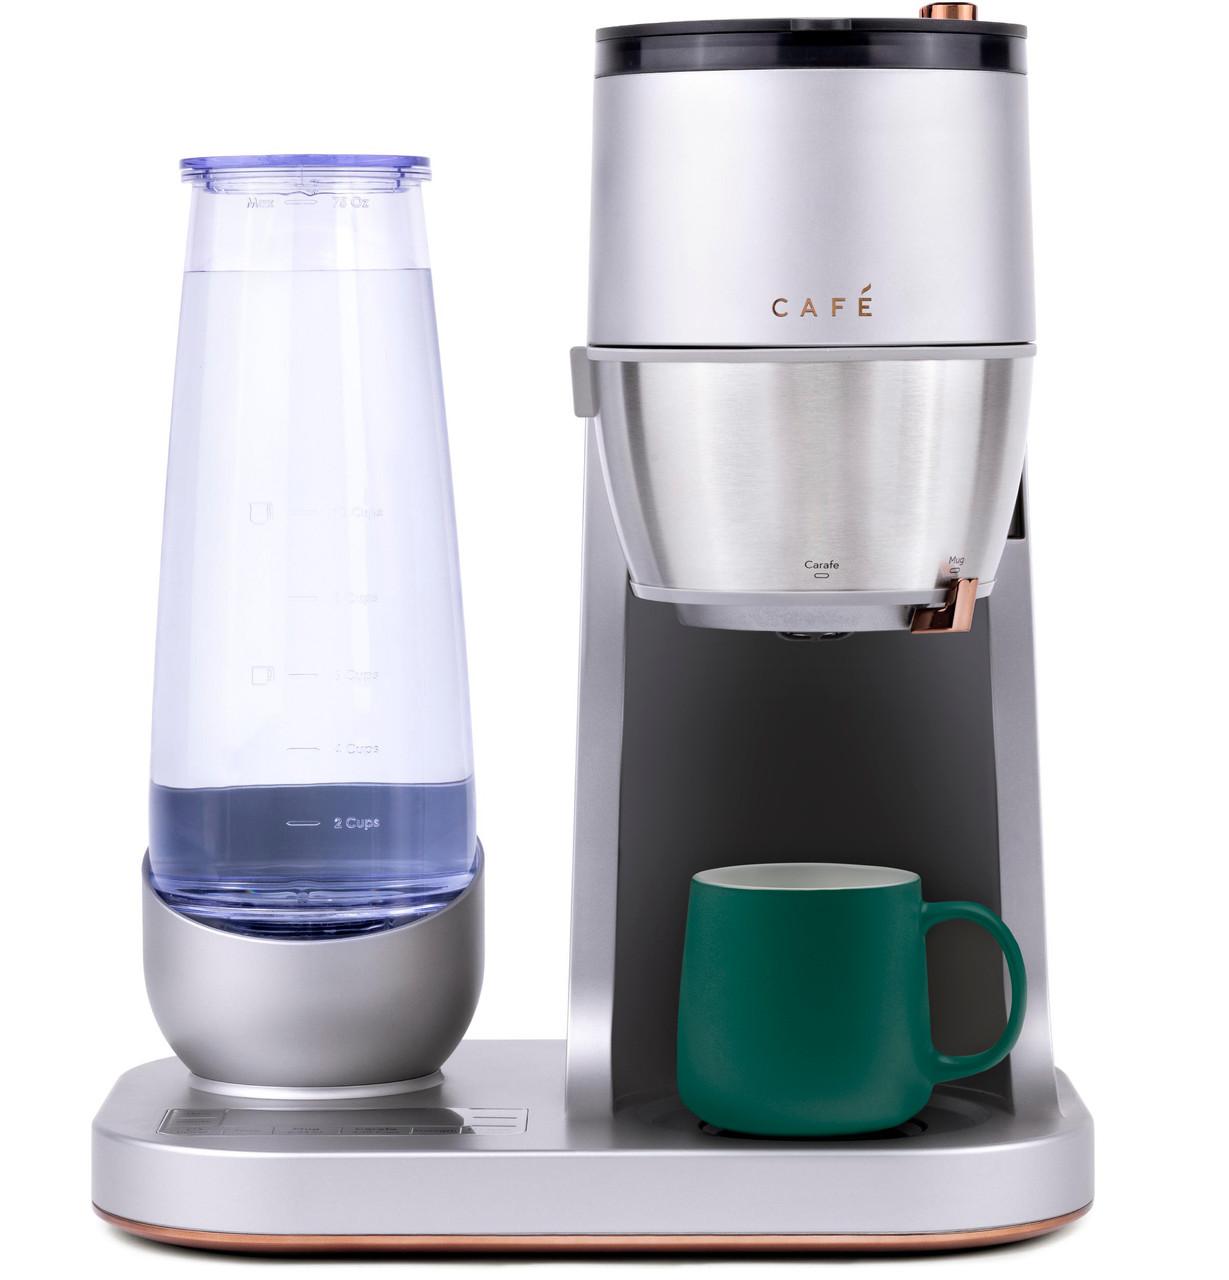 Cafe Caf(eback)™ Specialty Grind and Brew Coffee Maker with Thermal Carafe